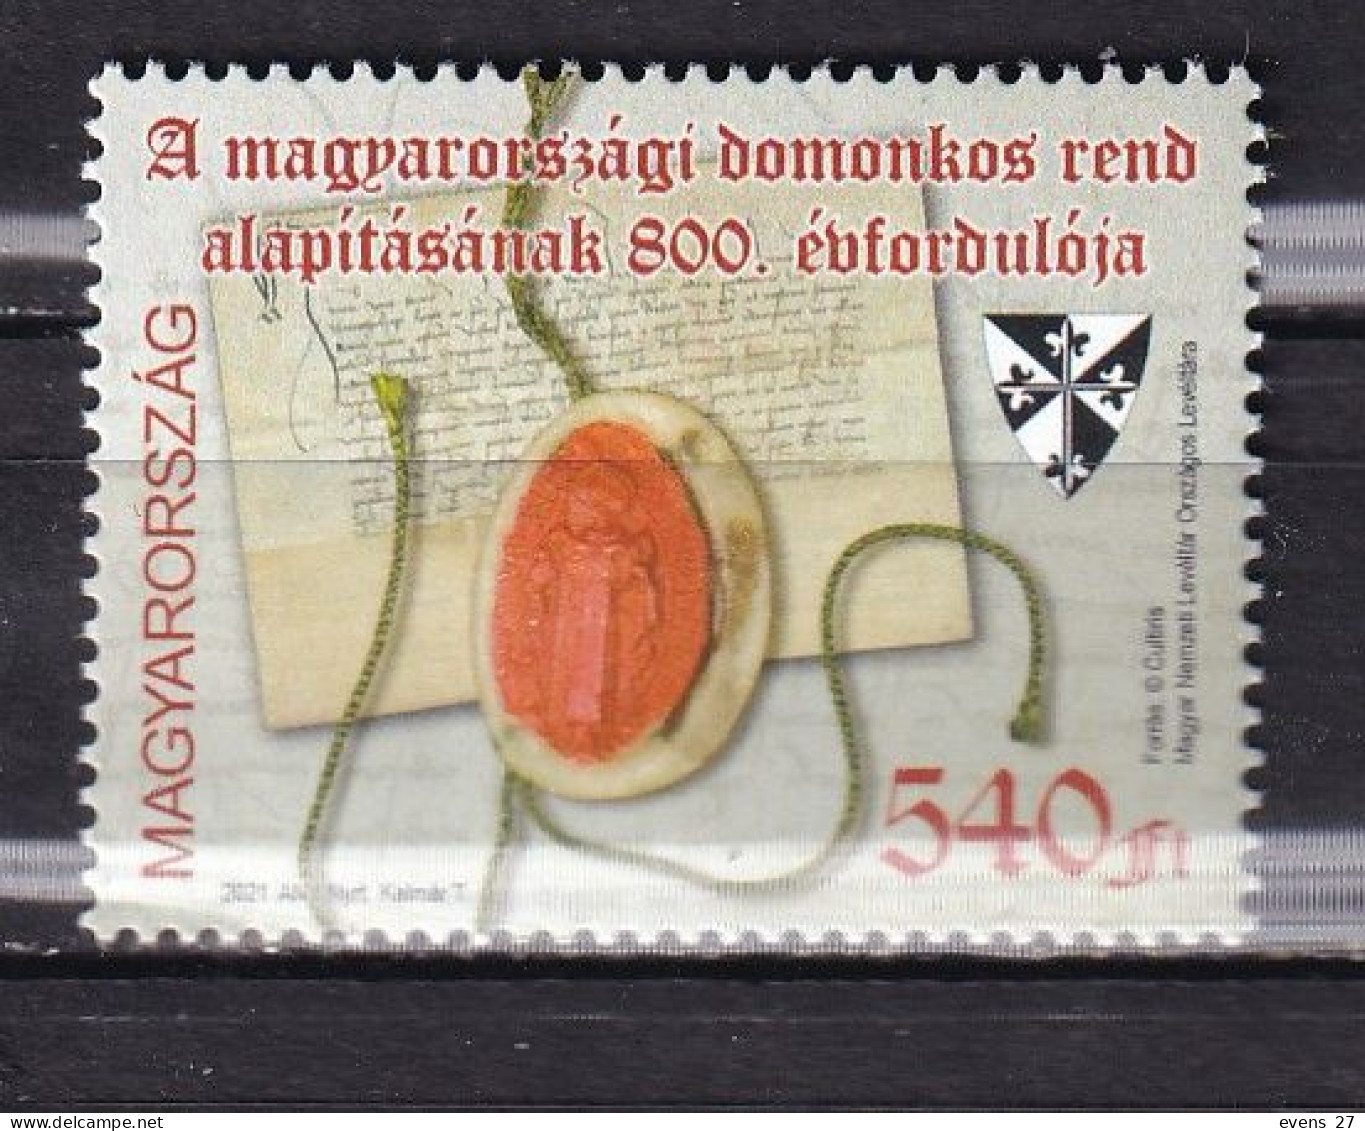 HUNGARY-2021- DOMINICAN ORDER-MNH. - Ungebraucht